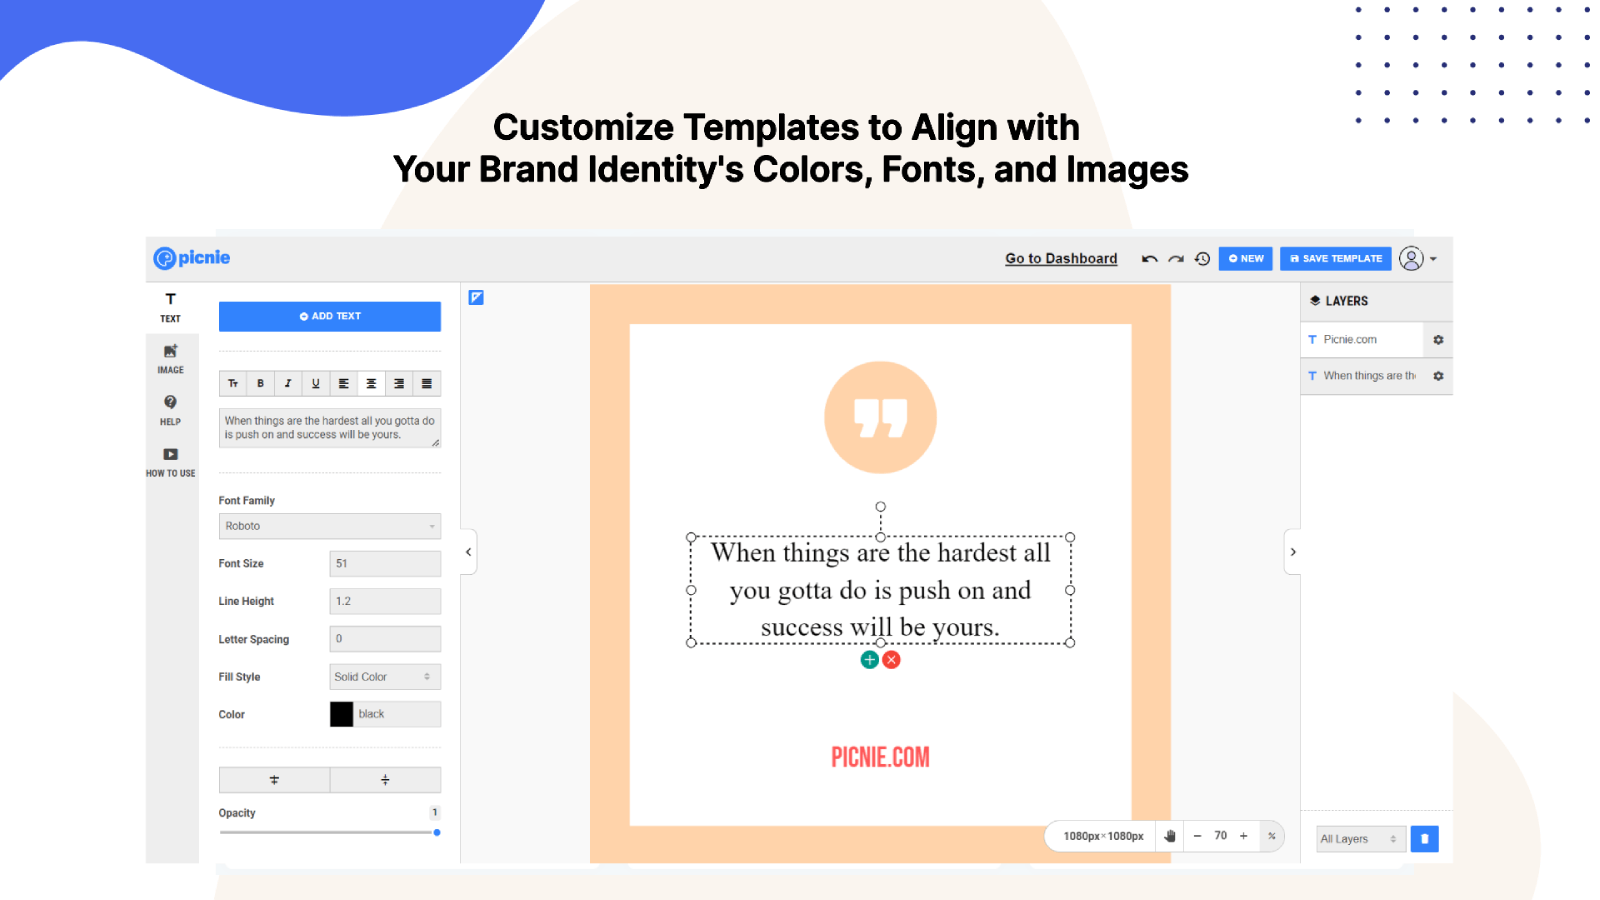 Customize Templates to Align with Your Brand Identity's Colors, Fonts, and Images